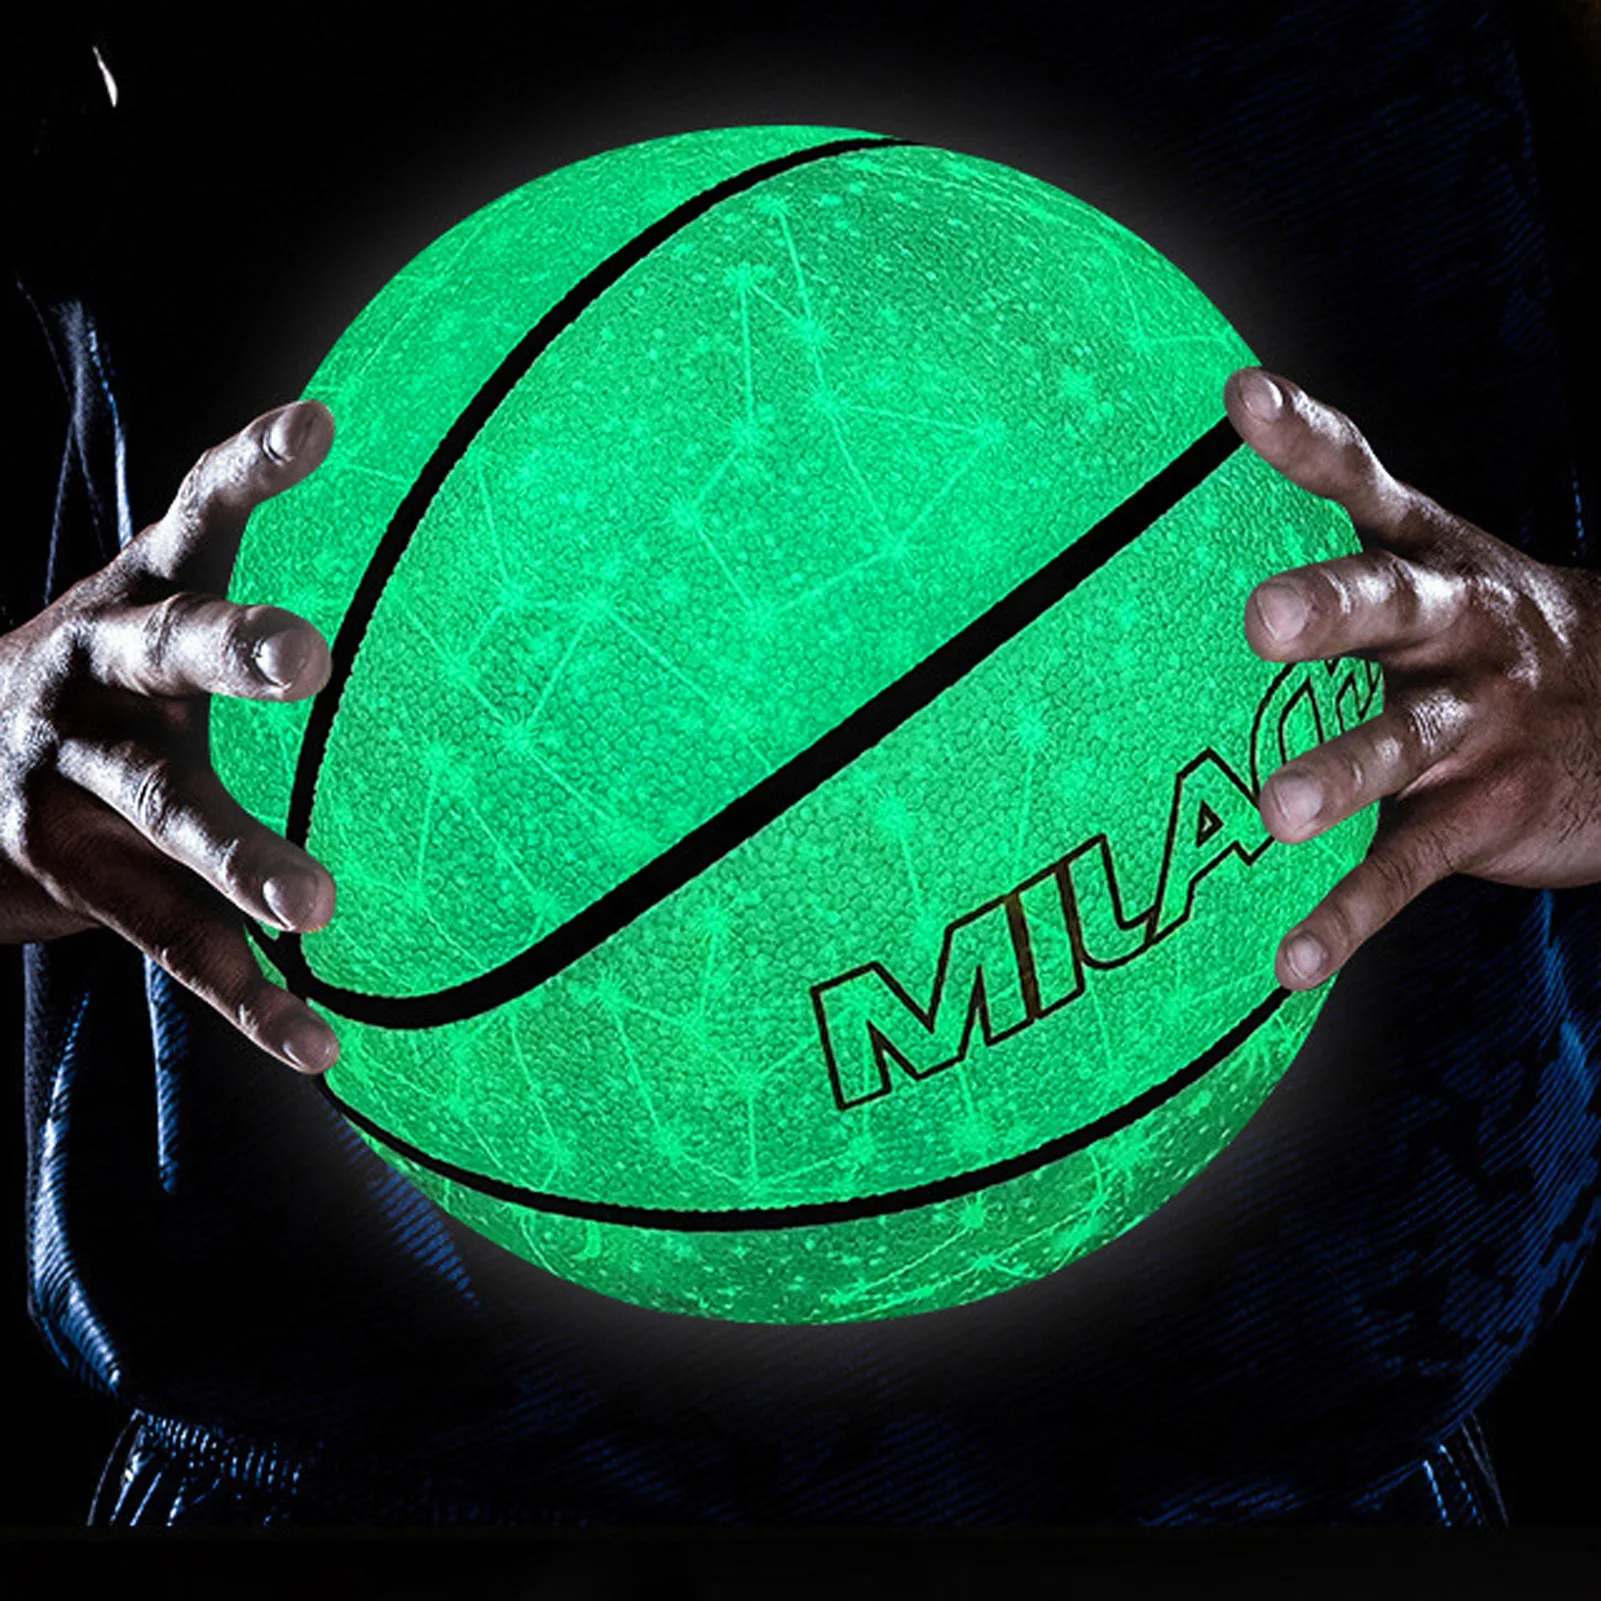 Luminous Holographic Wear-Resistant Glowing Sport Basketball Black Adult Size 